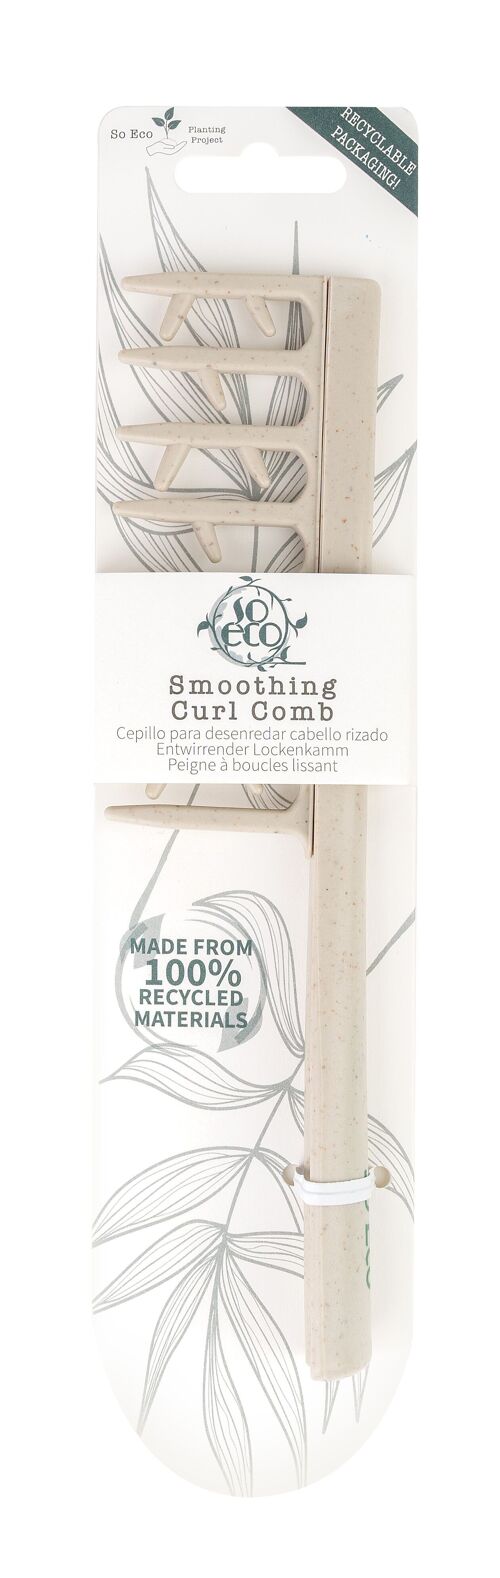 So Eco Smoothing Curl Comb